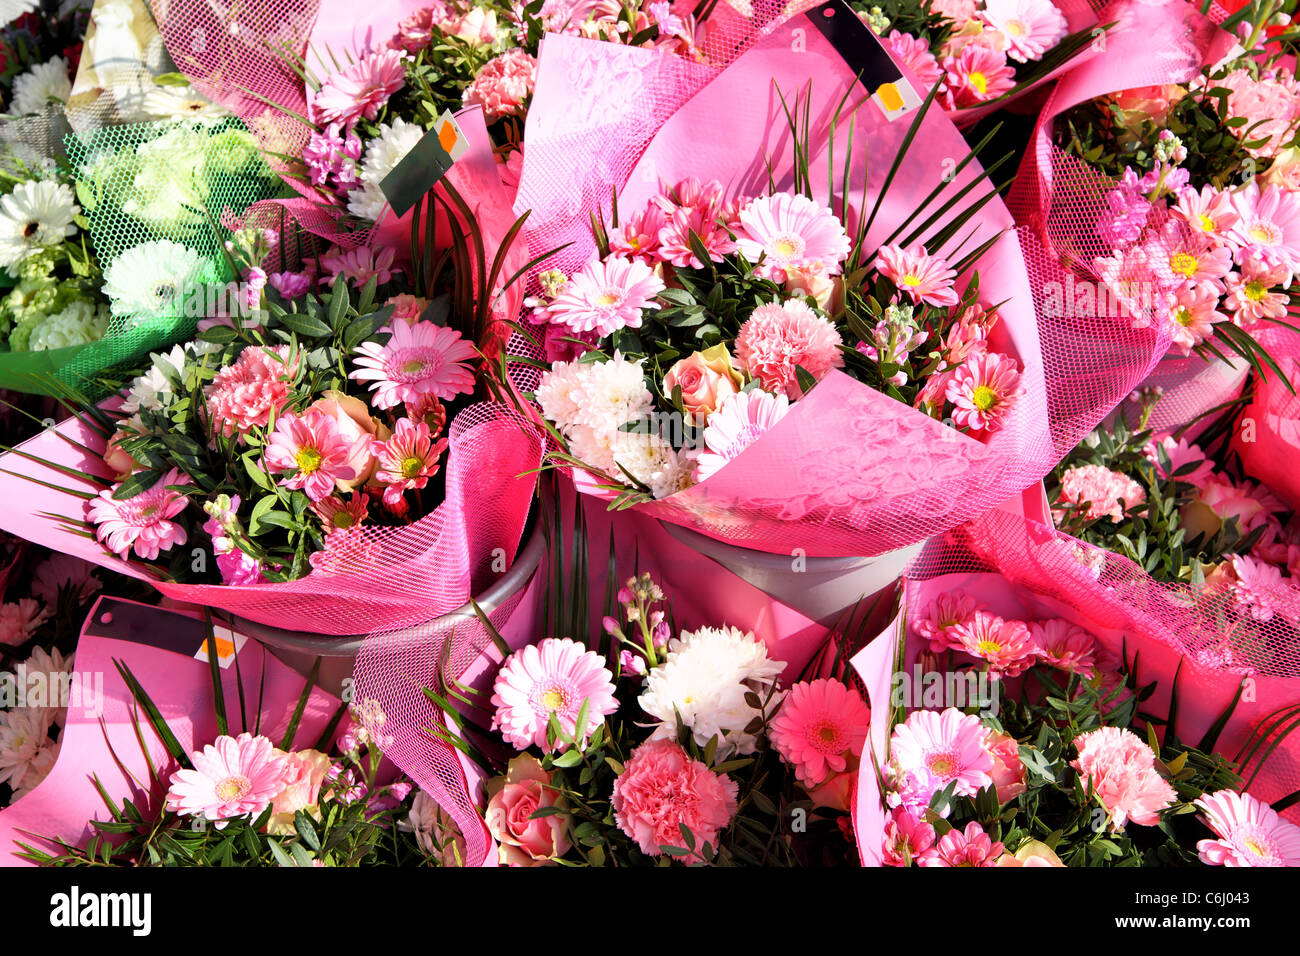 Bouquets of colorful daisies at a market stall Stock Photo